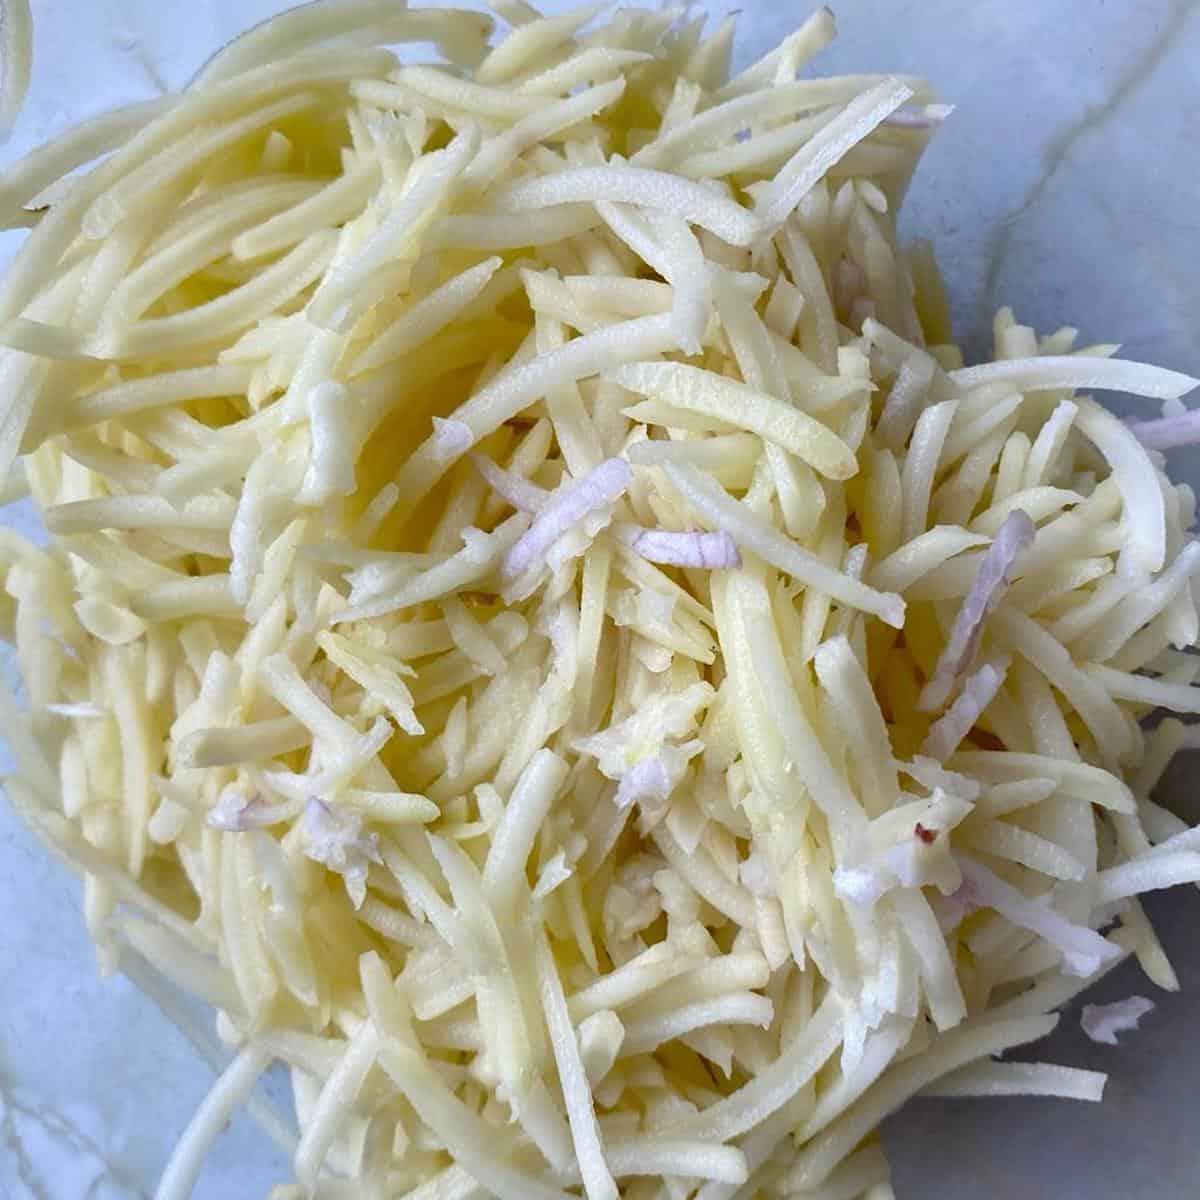 Raw grated potato and shallot in a mixing bowl.